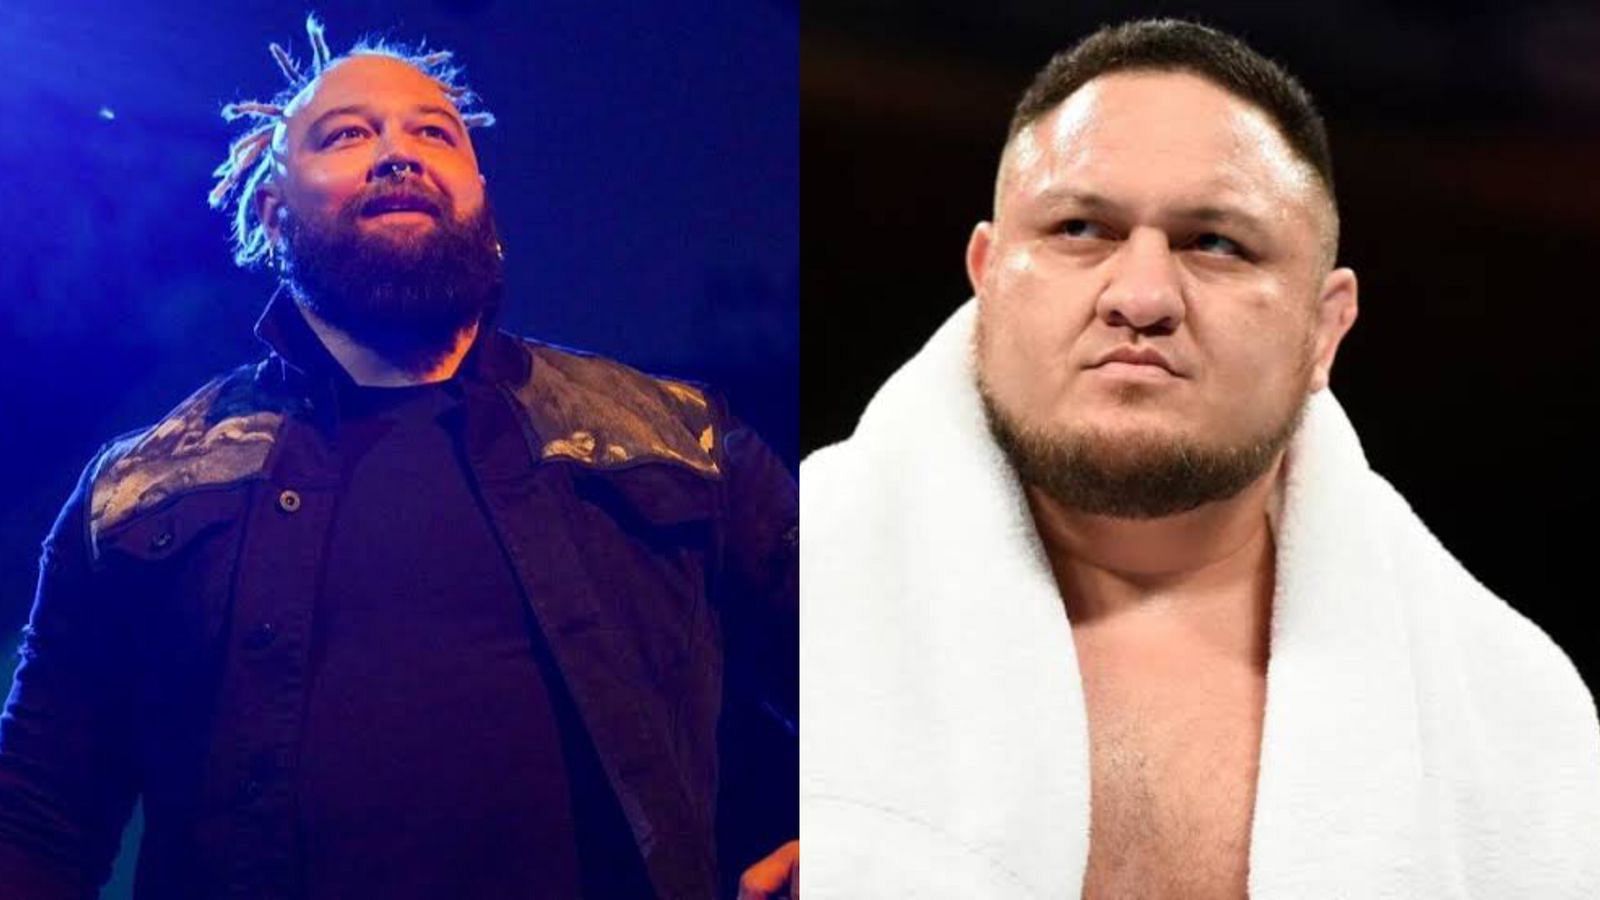 Samoa Joe has worked with Bray Wyatt during his time with WWE